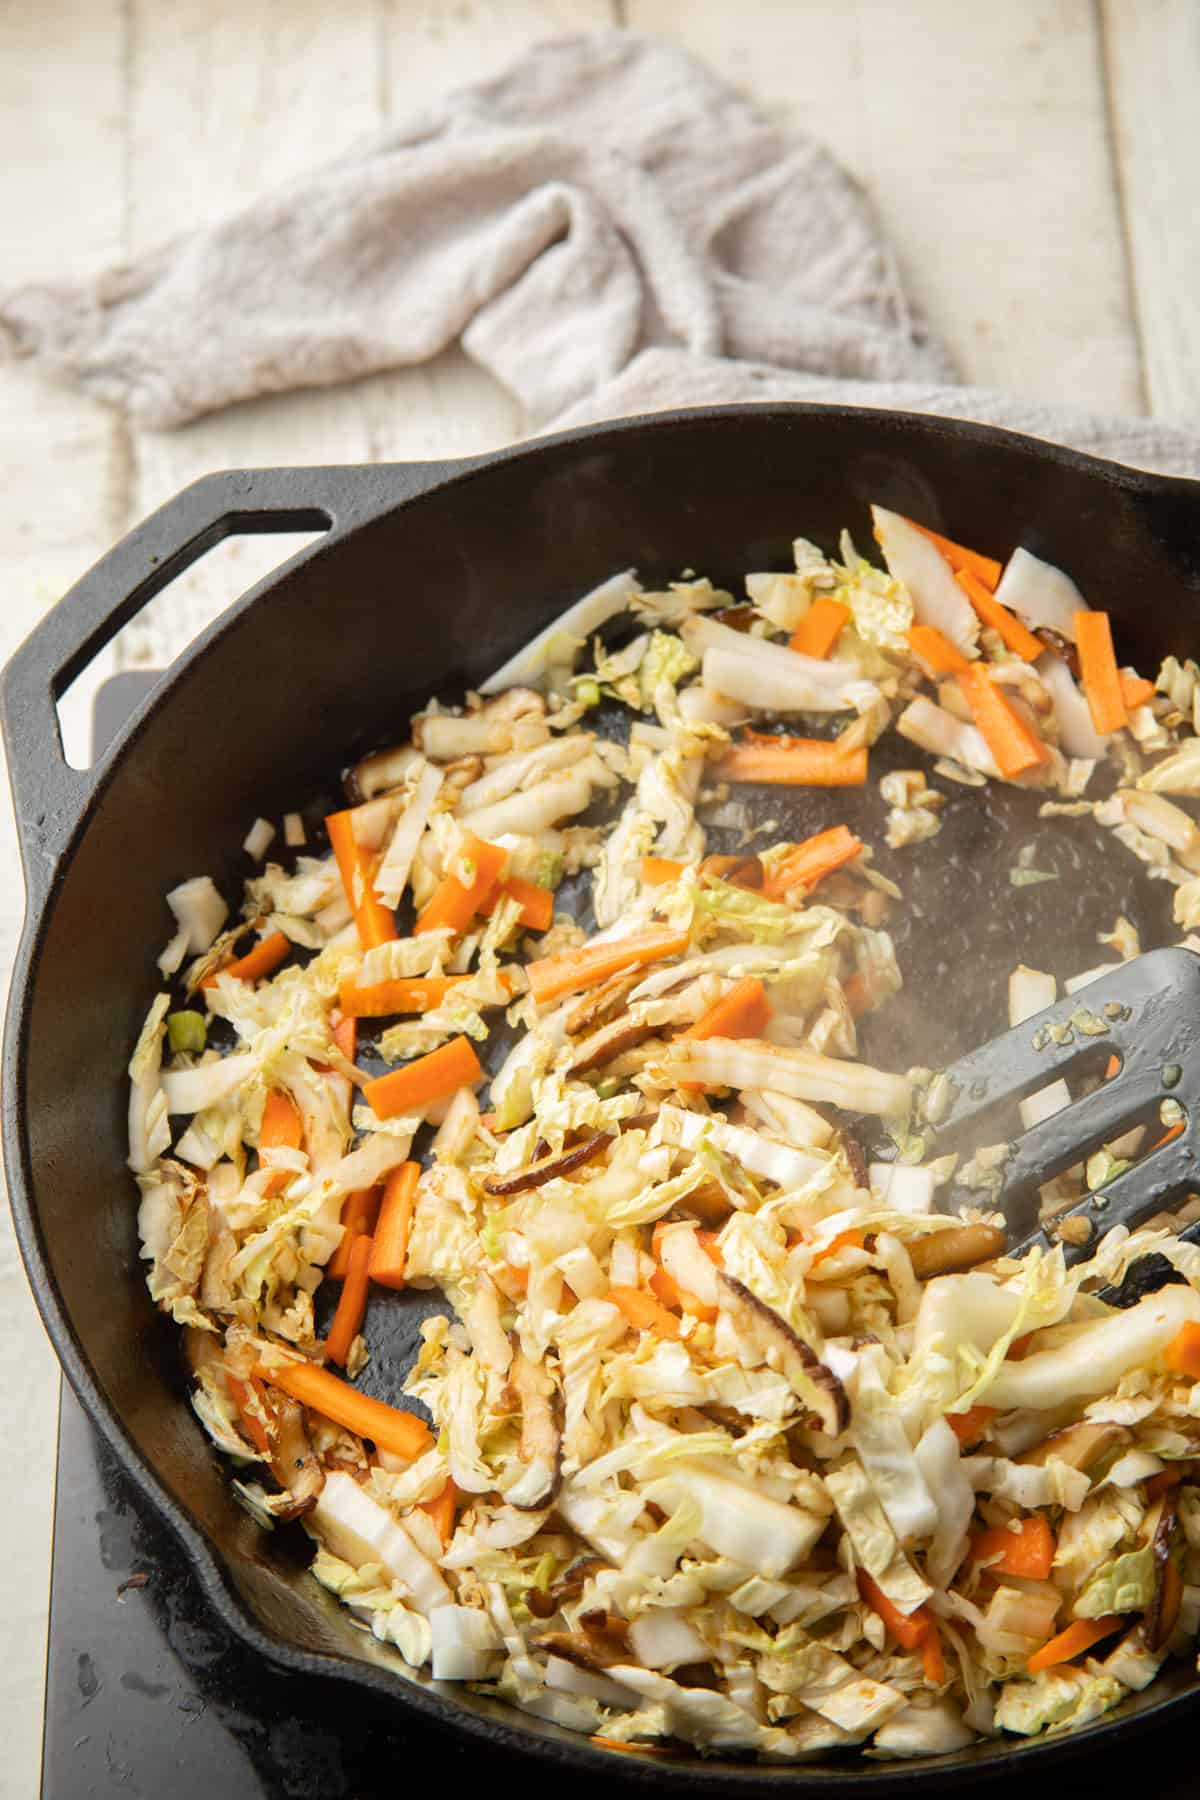 Cabbage, carrots, and mushrooms cooking in a skillet.